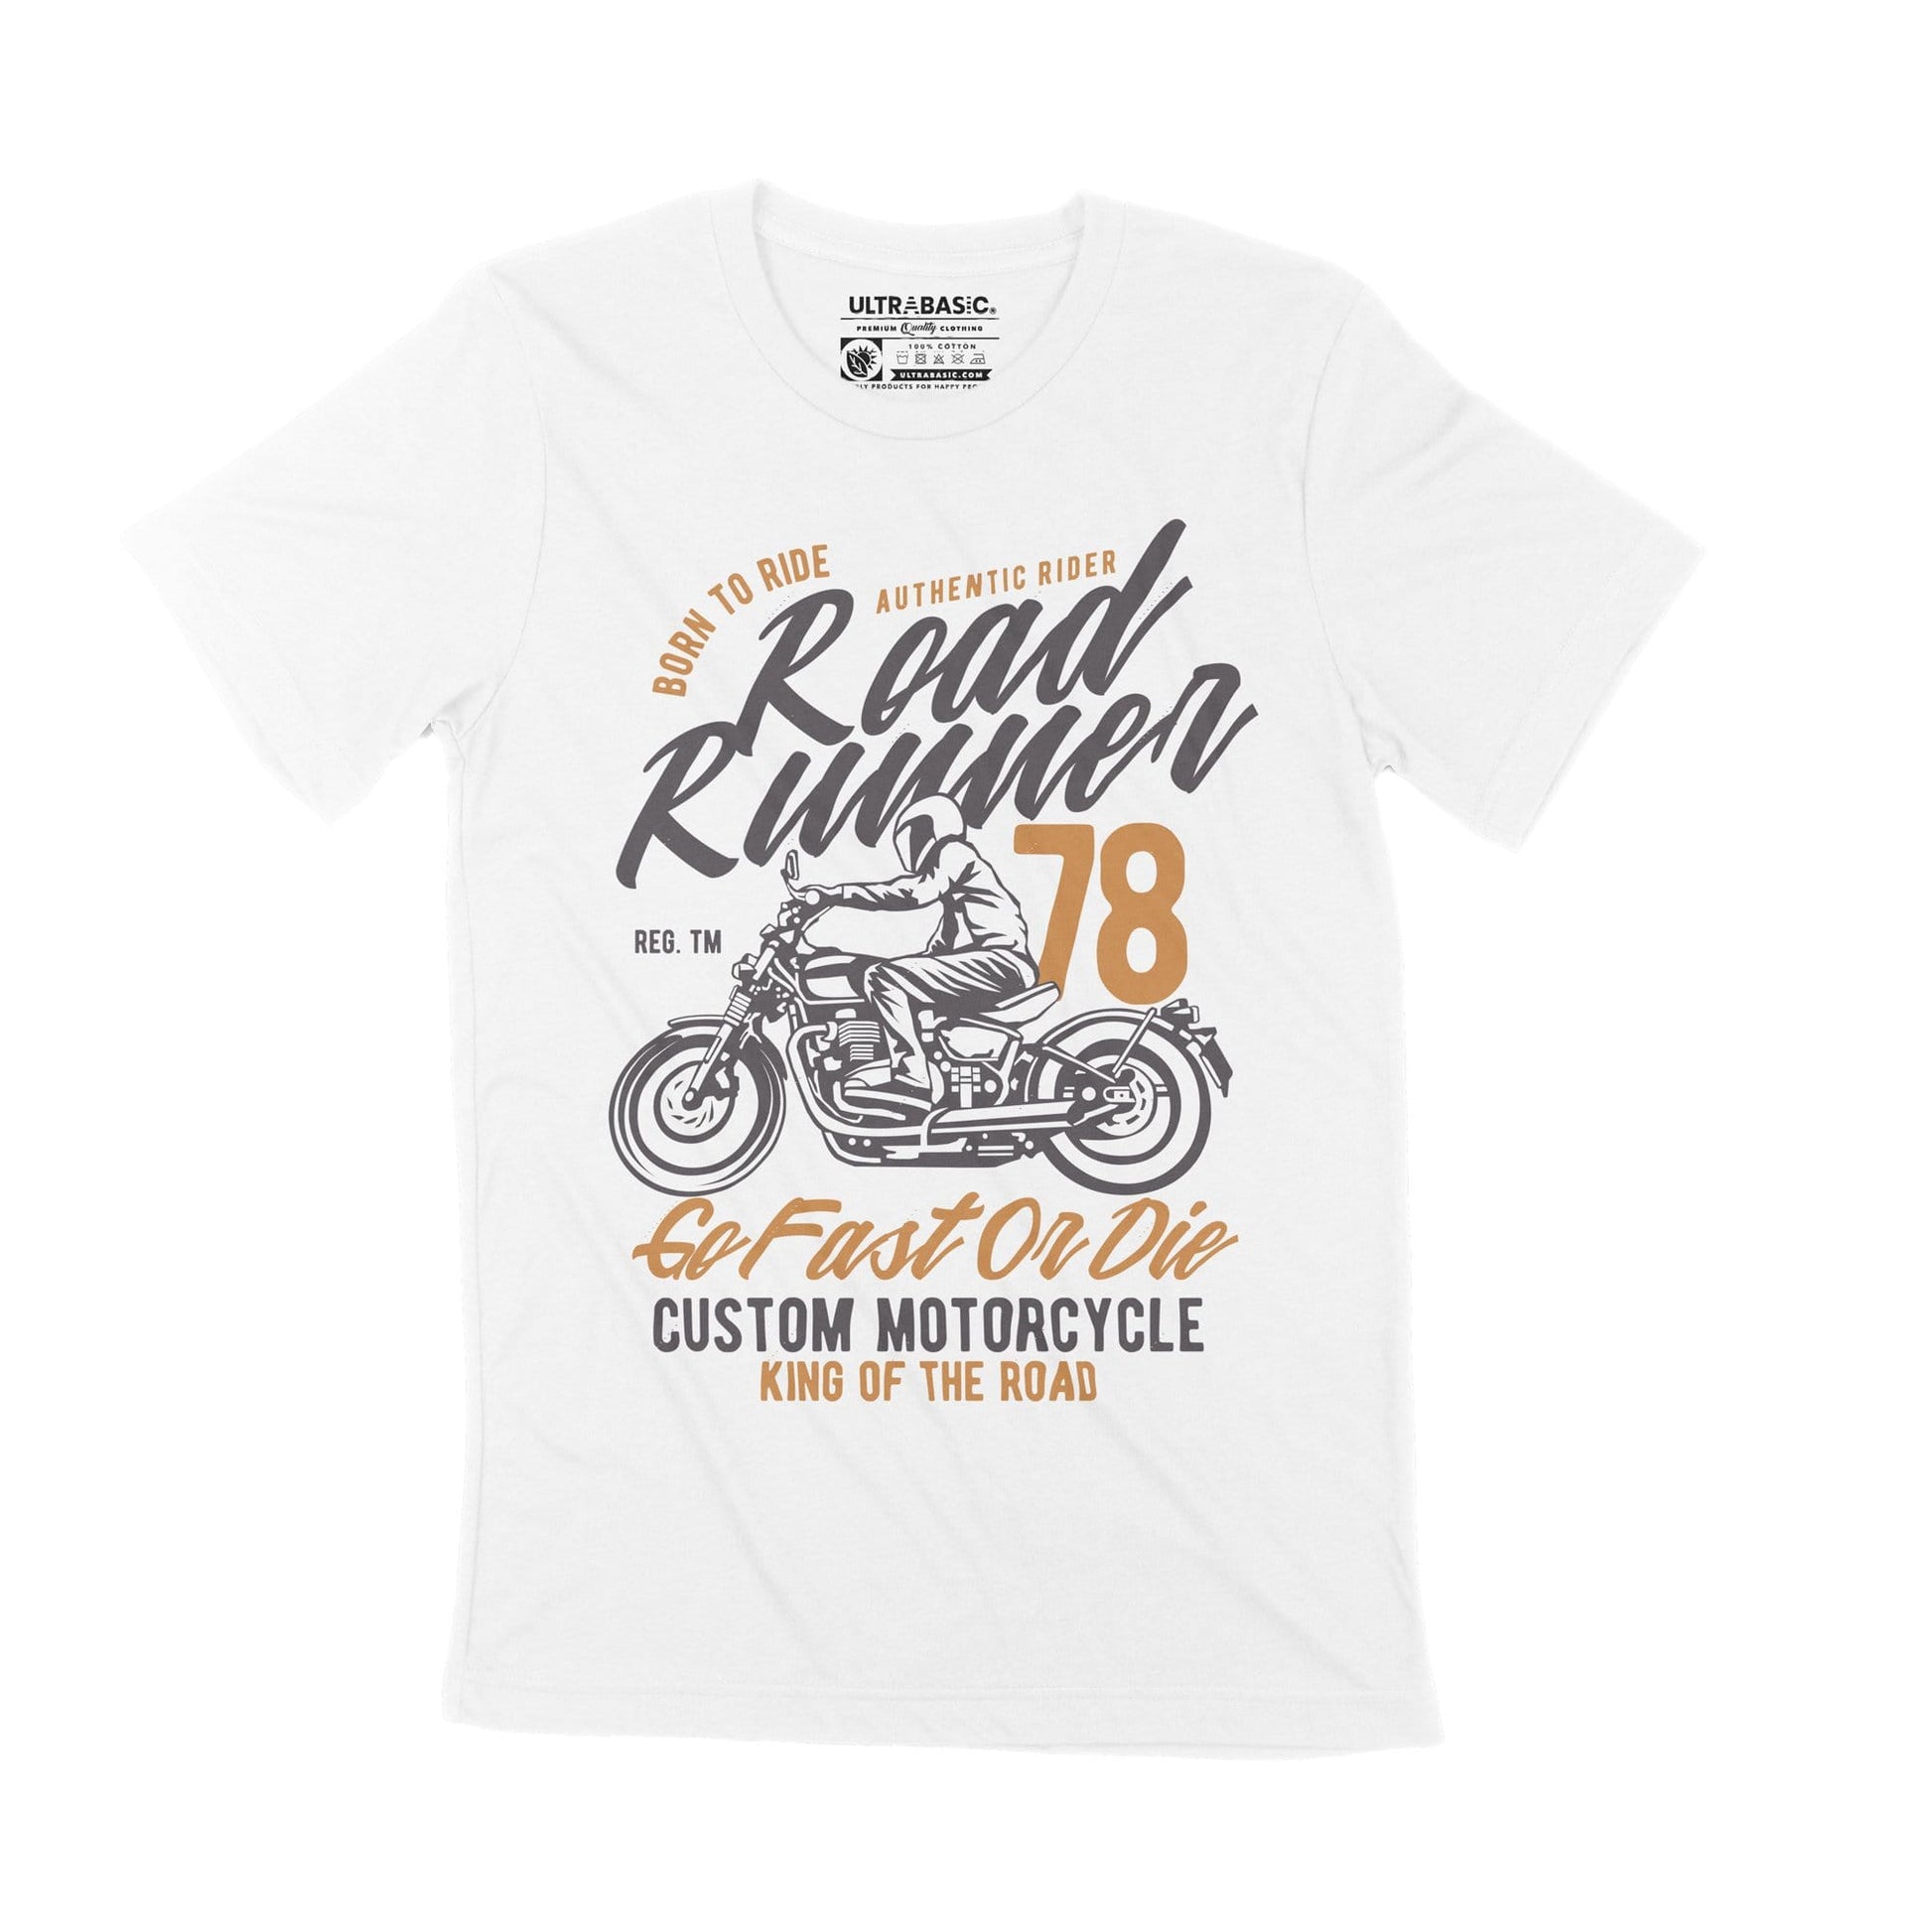 ULTRABASIC Vintage Motorcycle T-shirt for Men - Authentic Rider Men's Graphic Tee life behind bars engine ride mechanic clothes classic clothing outdoor fashion victory hot rod outfits usa guy apparel tees unisex motorbike genuine motorcycles merchandise highway bike speed street casual fast dad fathers day racer slogan